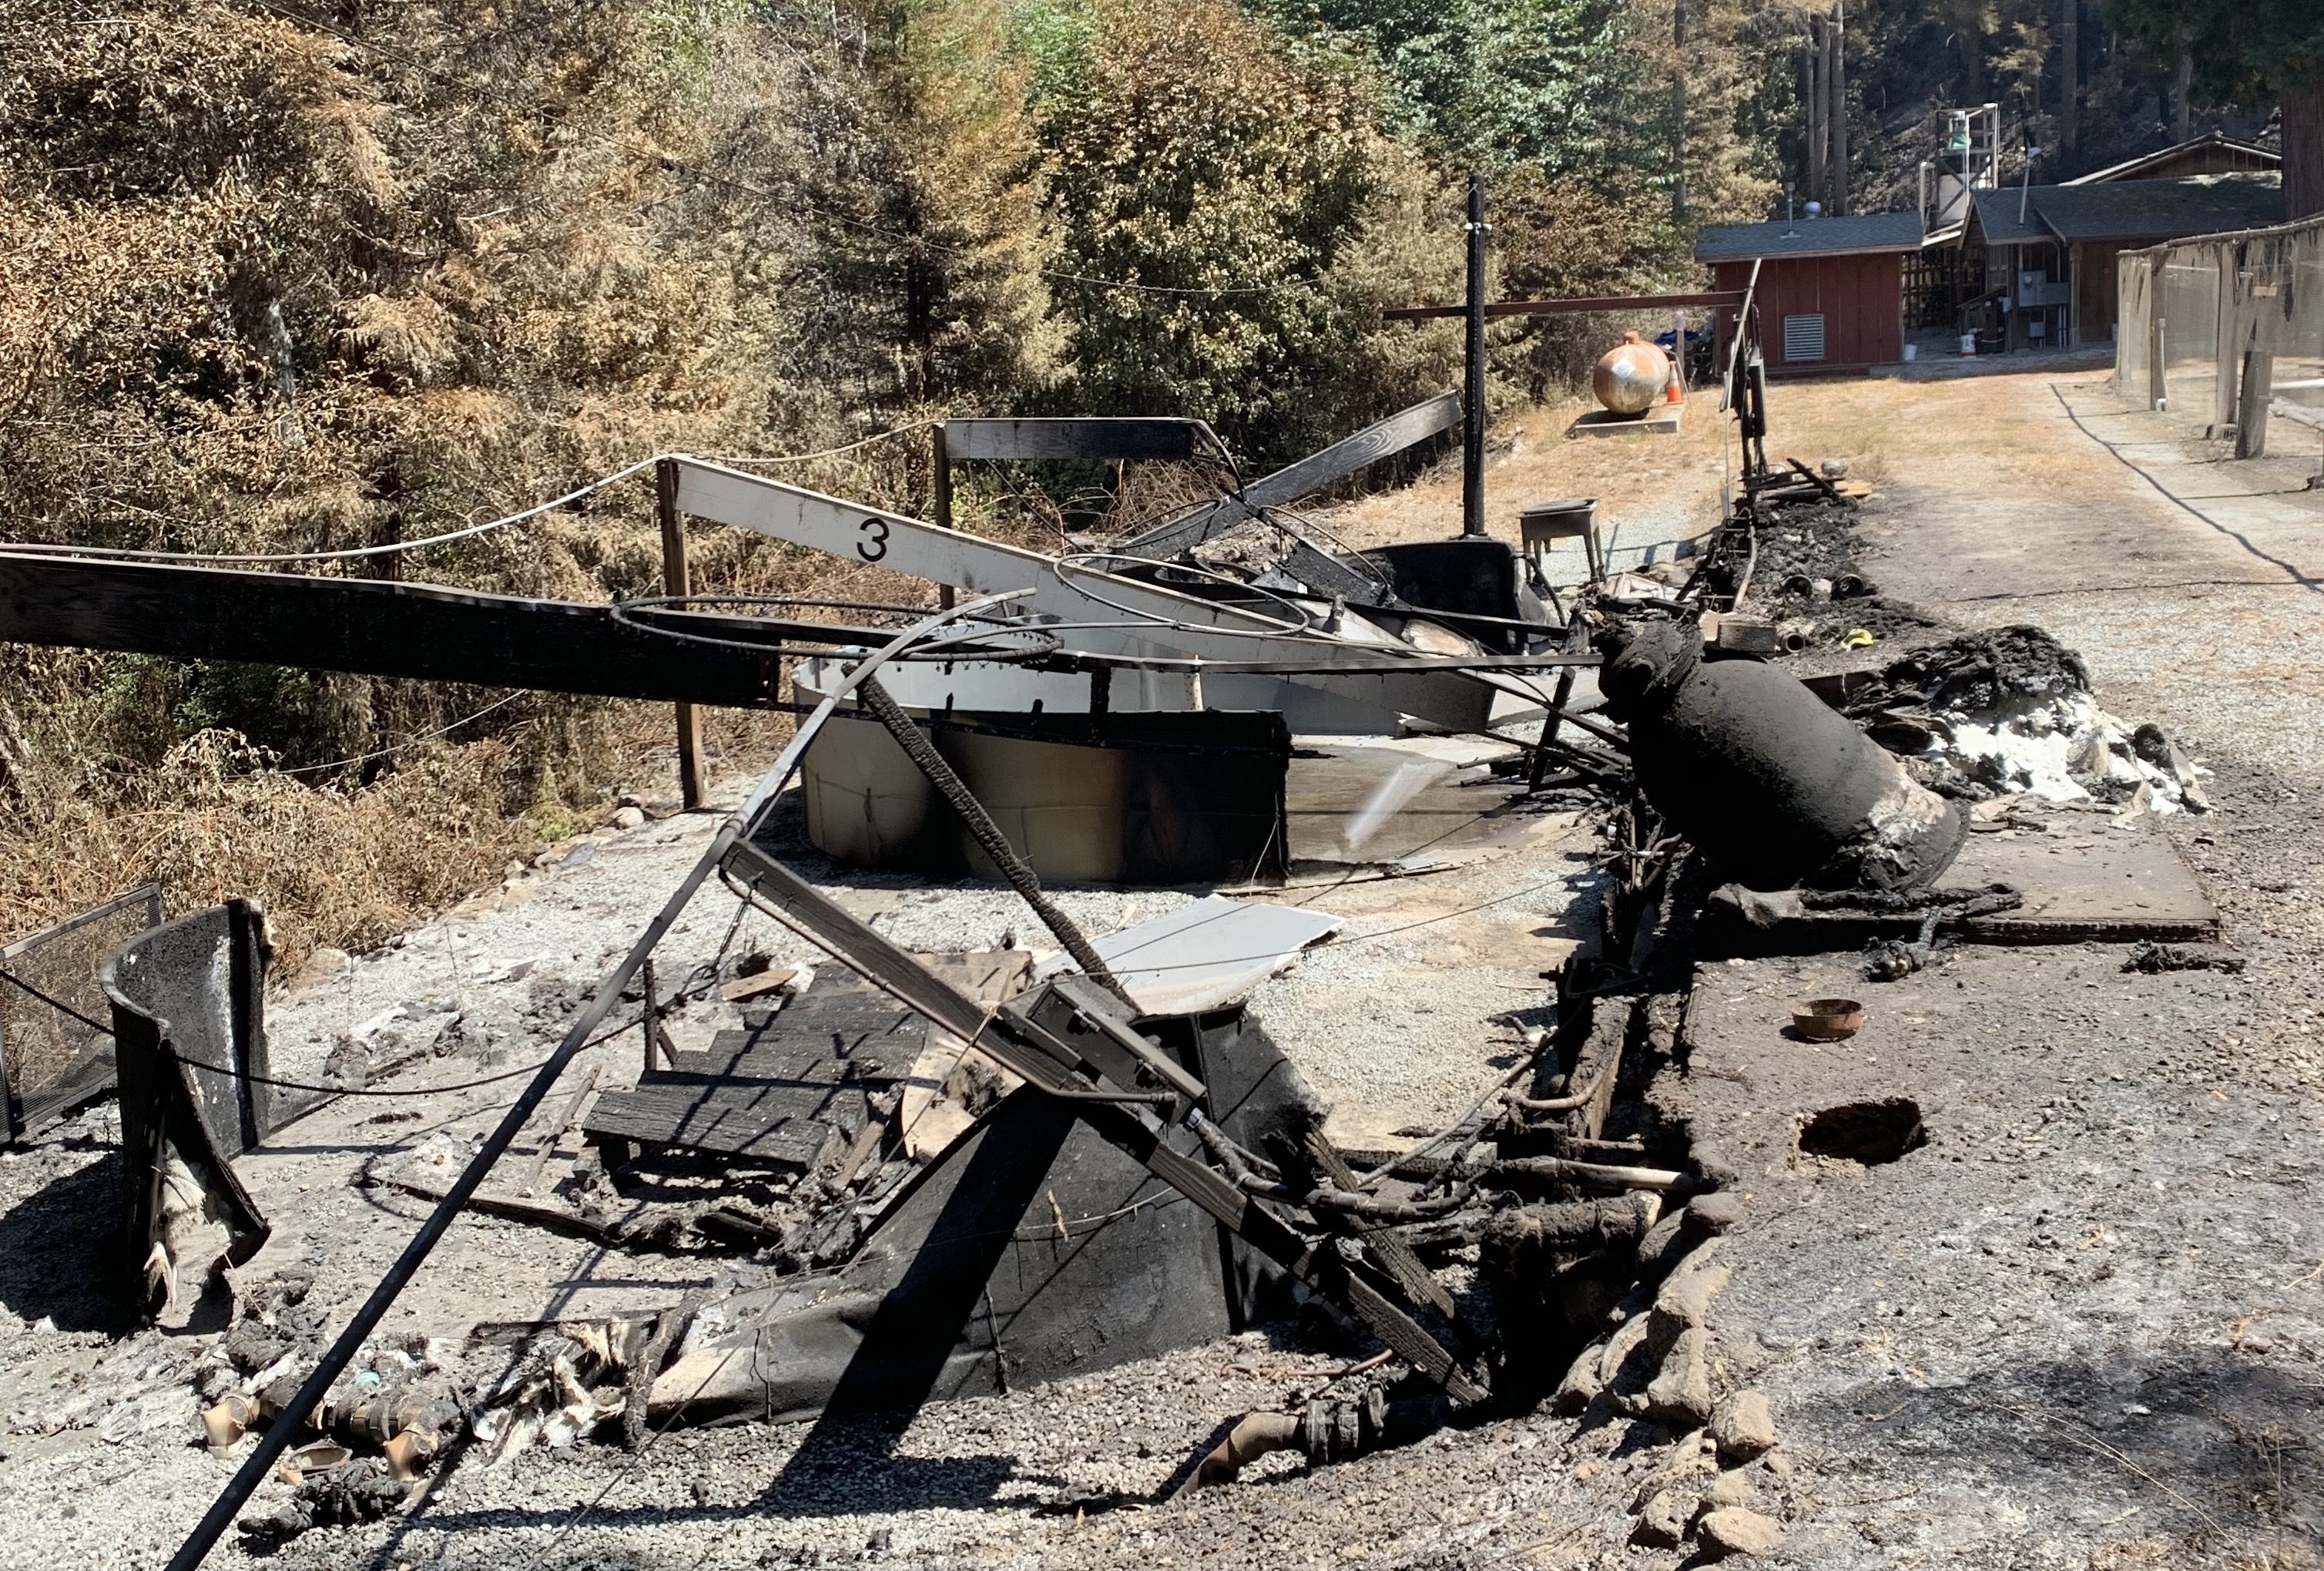 Damage to Monterey Bay Salmon and Trout project hatchery after fire